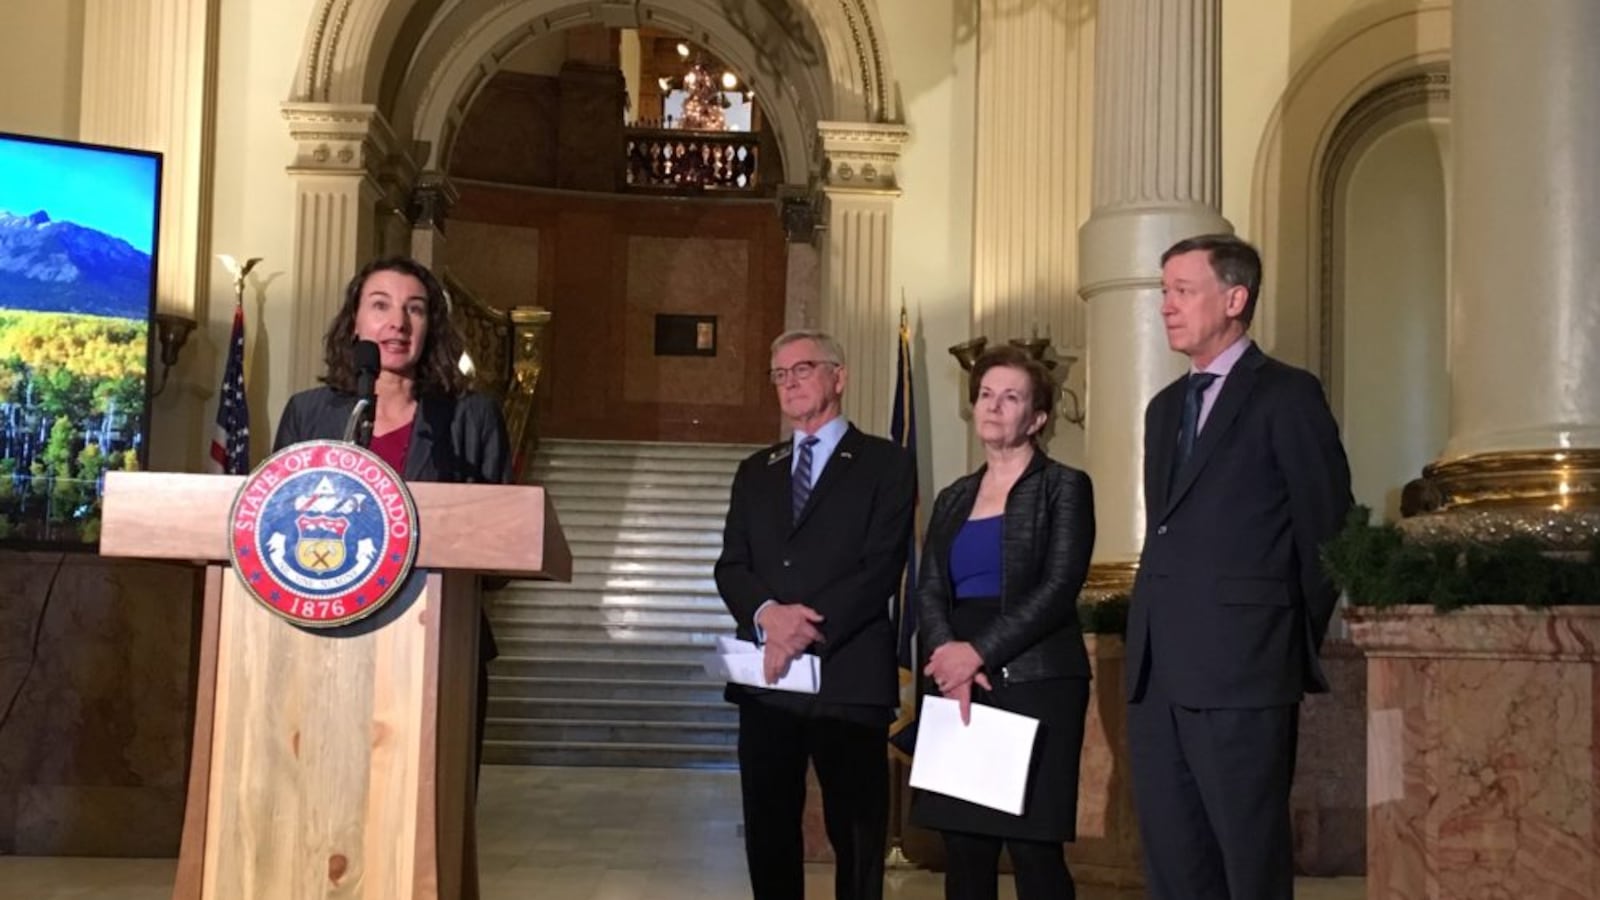 Colorado Education Commissioner Katy Anthes stressed that a new education blueprint respects local control, as state Rep. Bob Ranking, Lt. Gov. Donna Lynne, and Gov. John Hickenlooper look on.